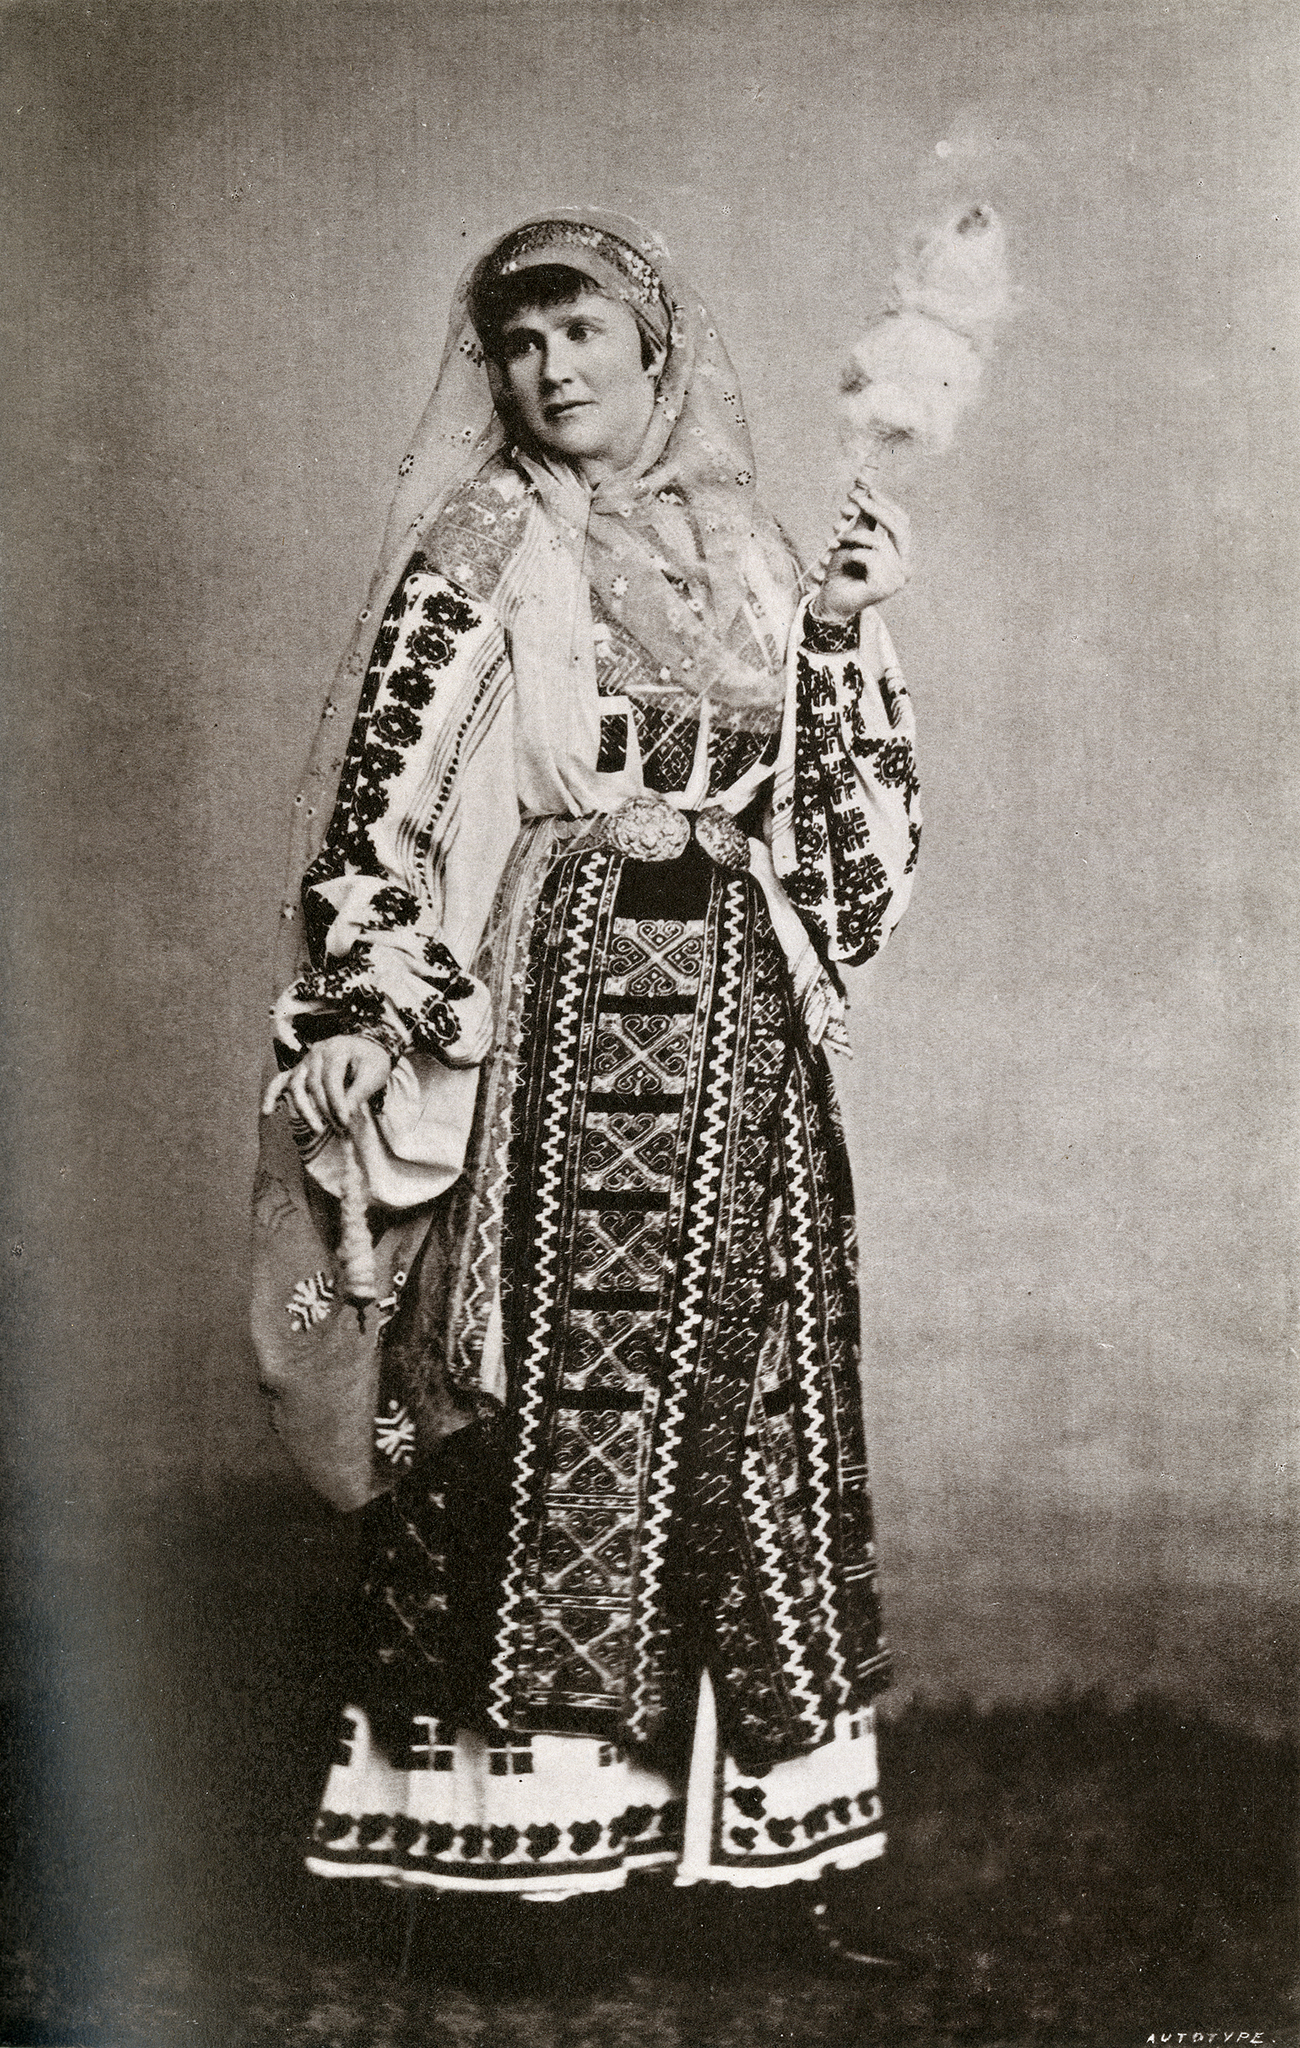 A black and white photograph of a woman wearing a patterned dress along with a hood. She holds a wooden handle that is surrounded by what looks to be cotton.